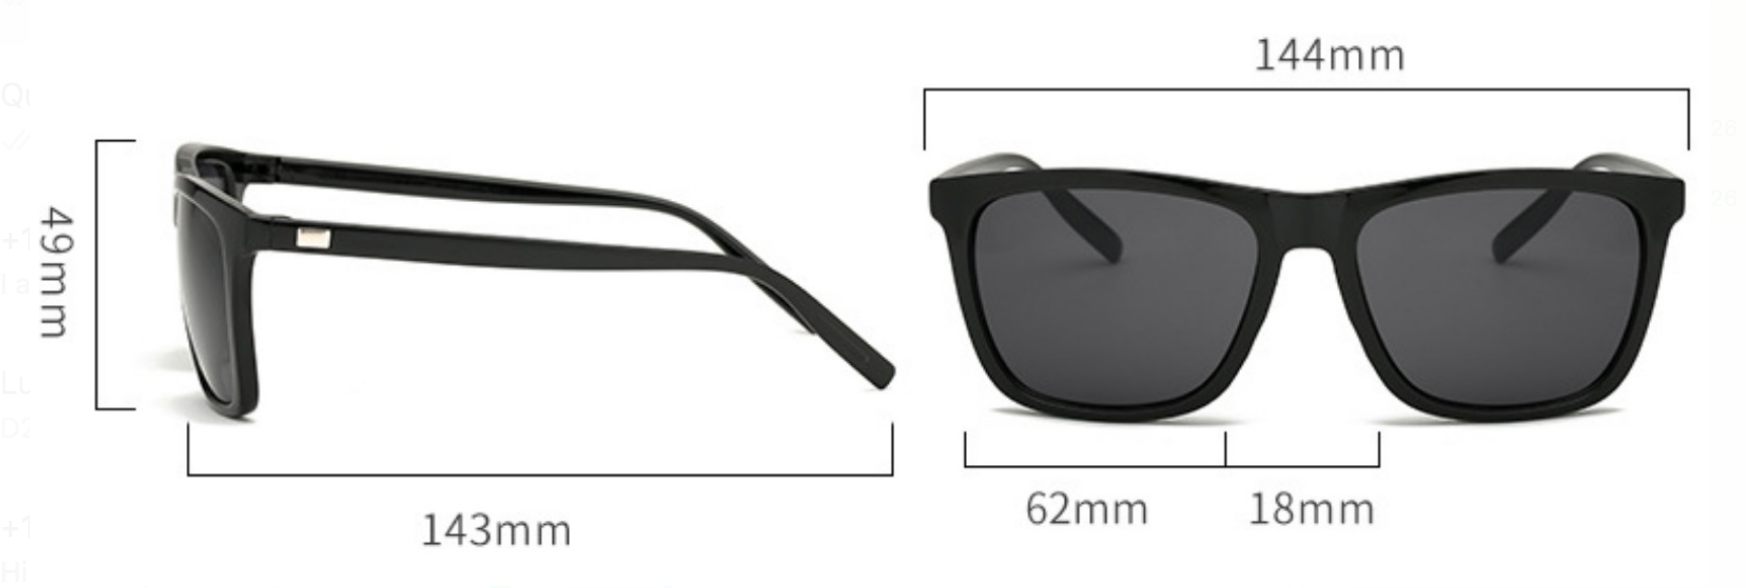 European And American Sunglasses Sports Cycling Glasses Rivet Sunglasses Sunglasses Men And Women The Same Outdoor